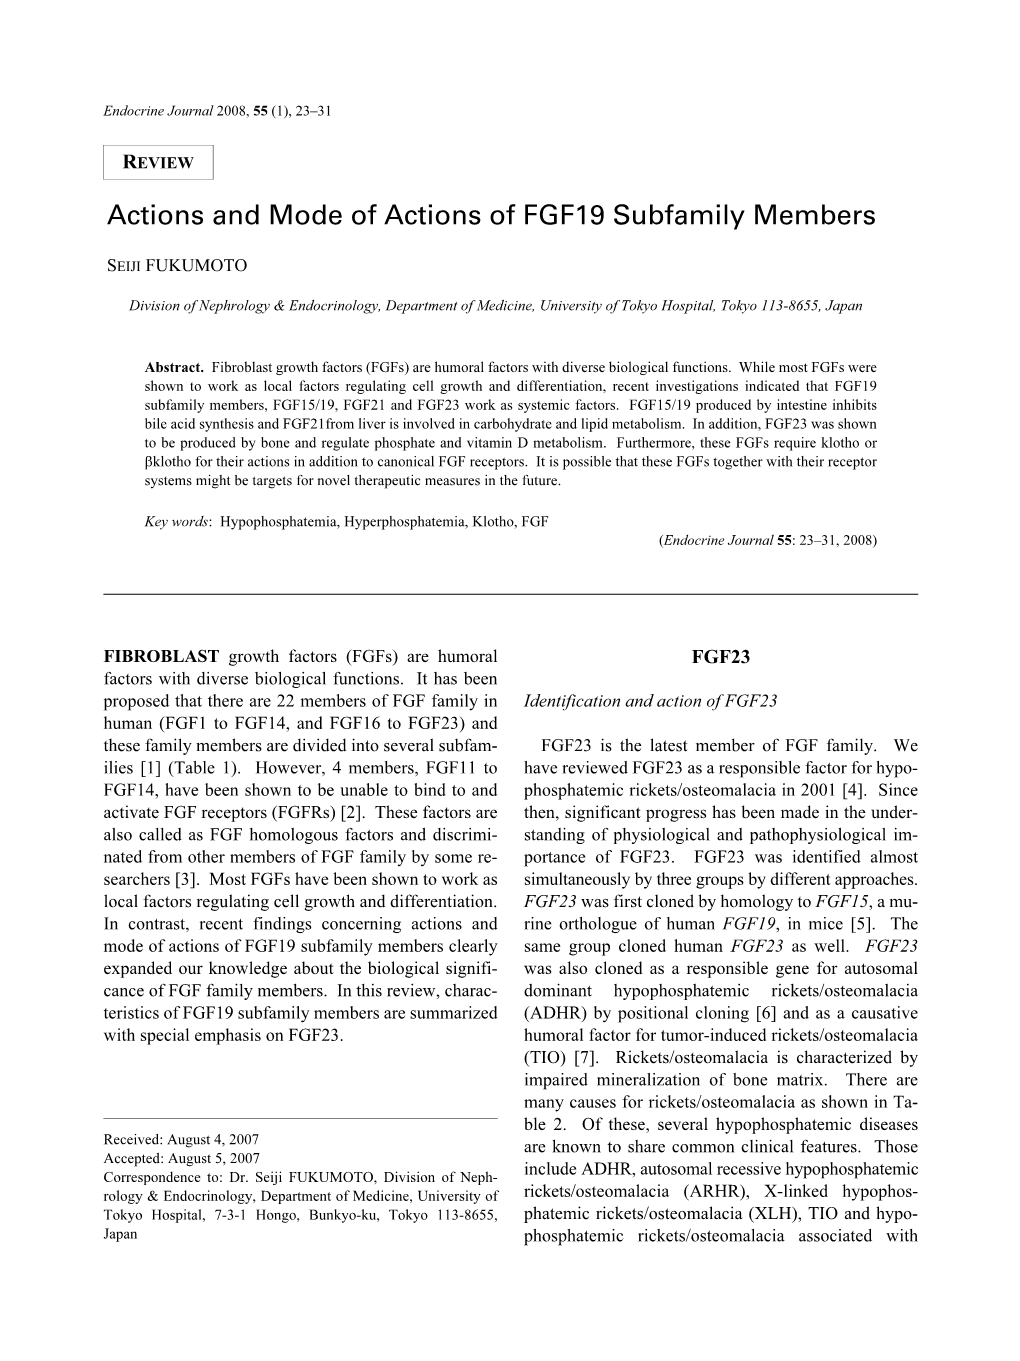 Actions and Mode of Actions of FGF19 Subfamily Members